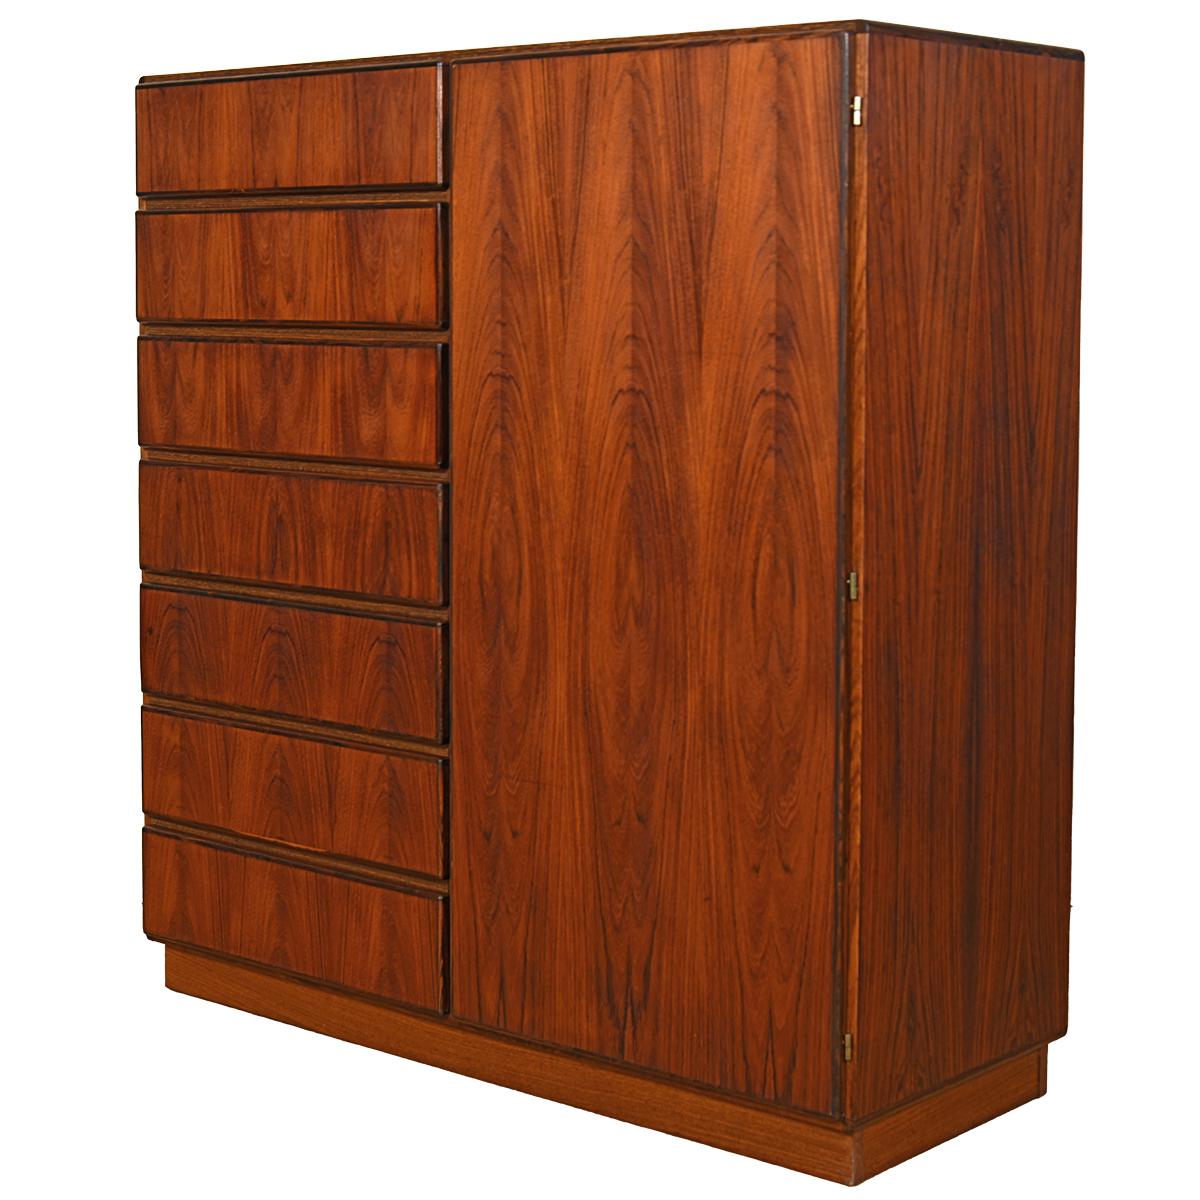 If you still need a dresser after filling this handsome gent’s chest, then perhaps you have too much! A storage powerhouse, this piece has deep drawers that roll out for your bulkier items and adjustable, shallow drawers for smaller items.

The six